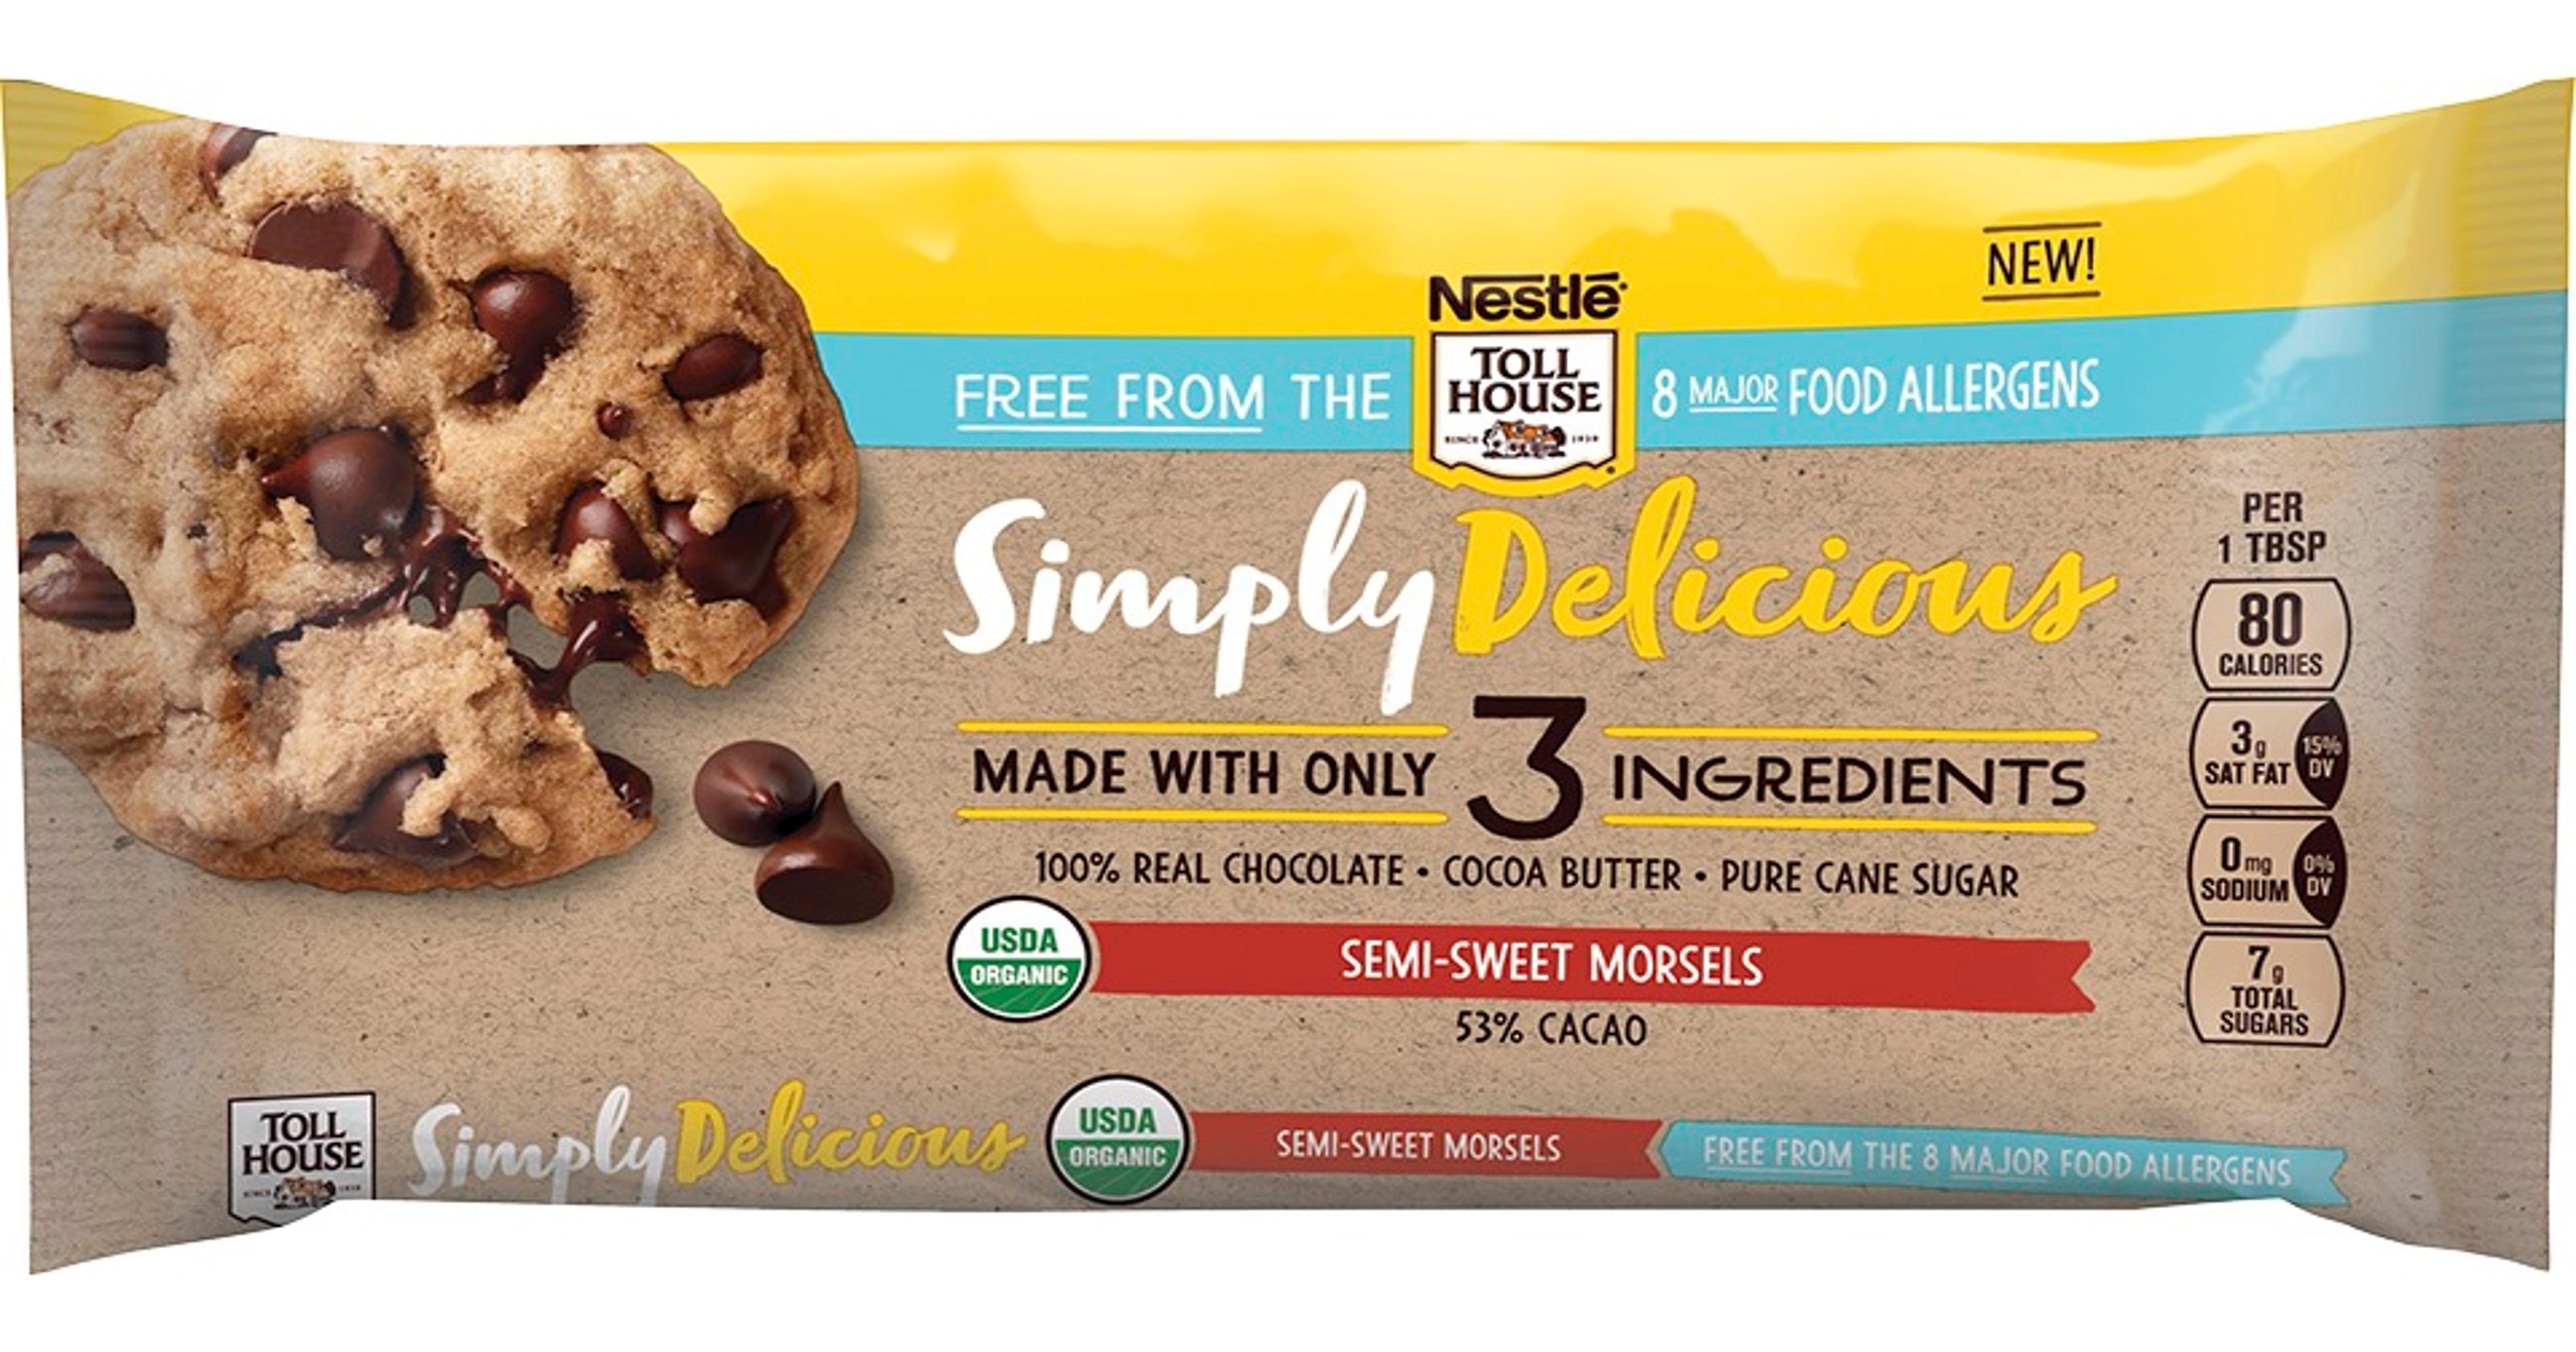 chips chocolate allergen nestle toll ingredients ingredient delicious dairy nut semi sweet morsels simply three nestlé